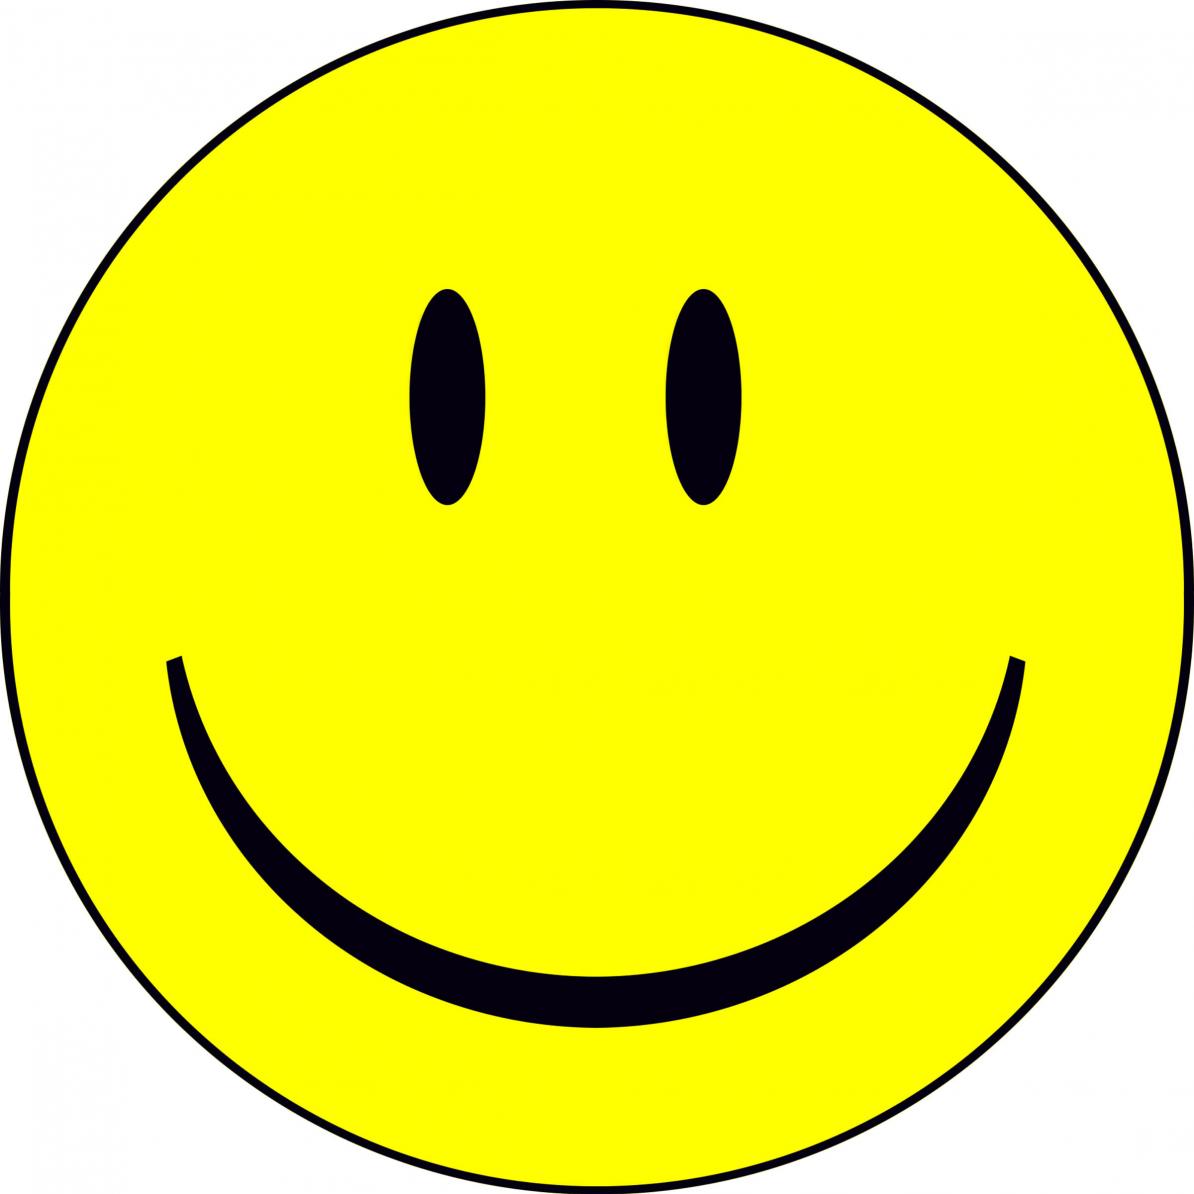 Free clipart images smiling faces